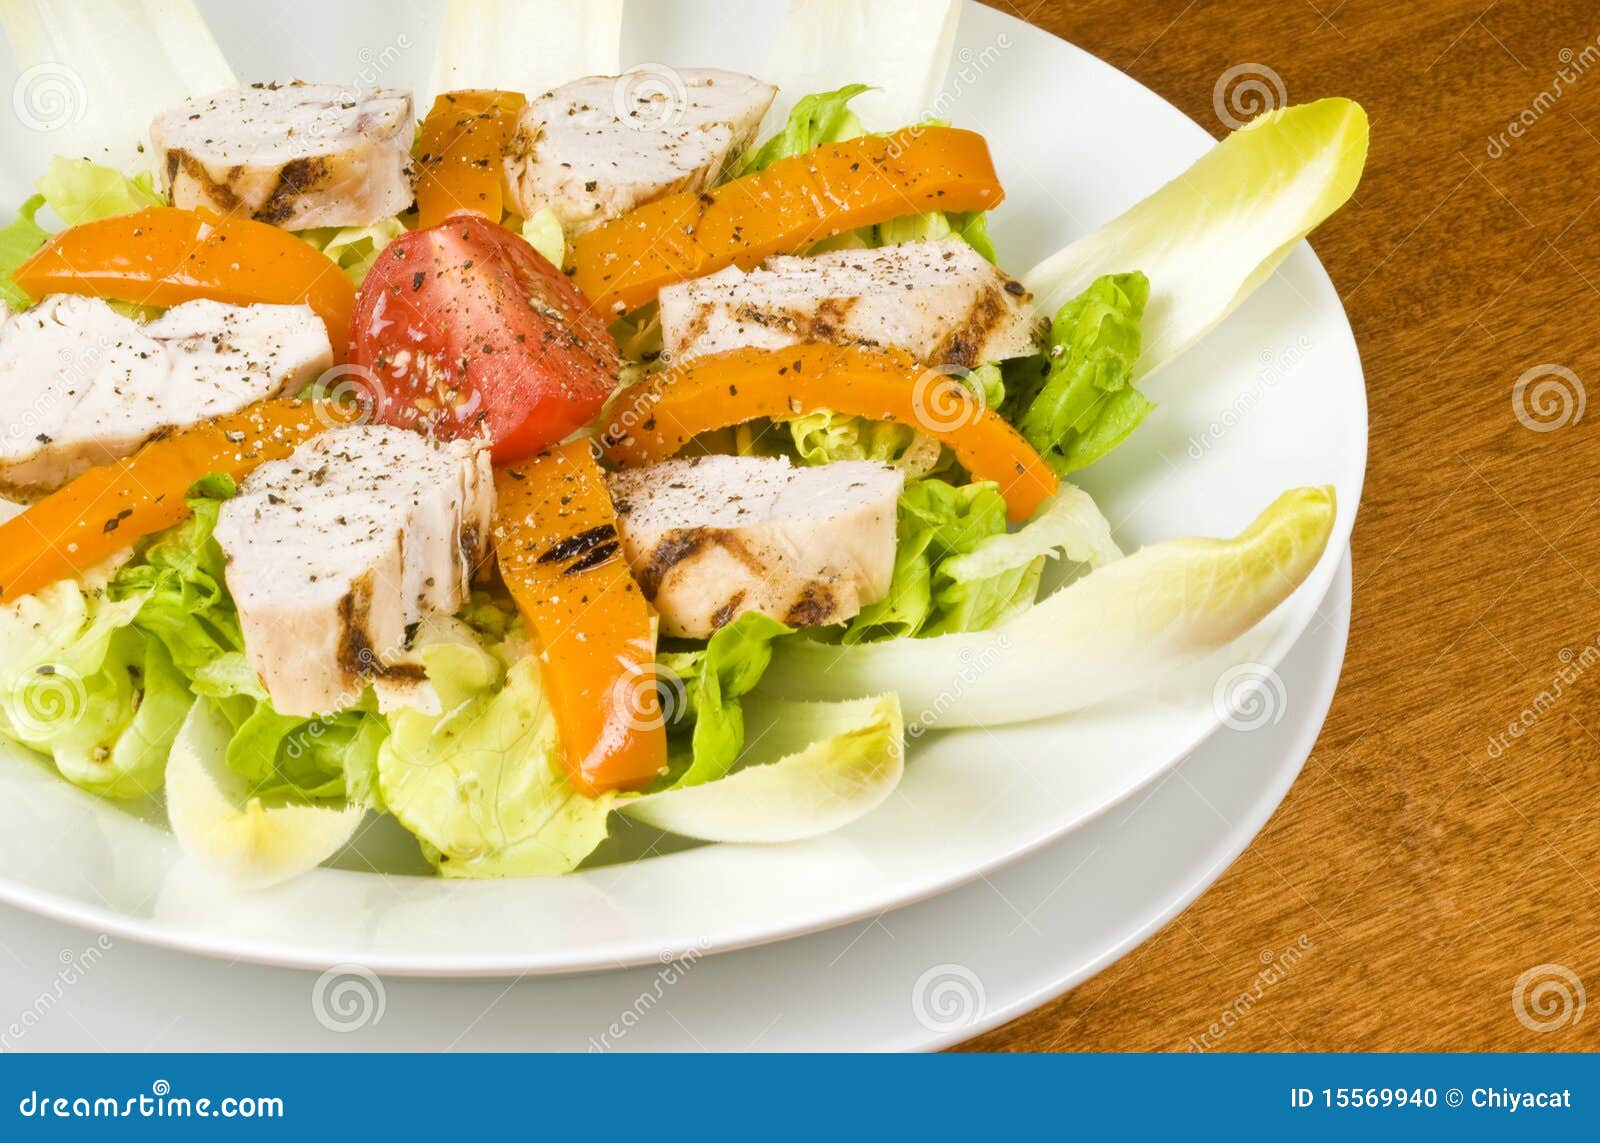 Grilled Chicken Breast Salad with Endive Stock Photo - Image of orange ...